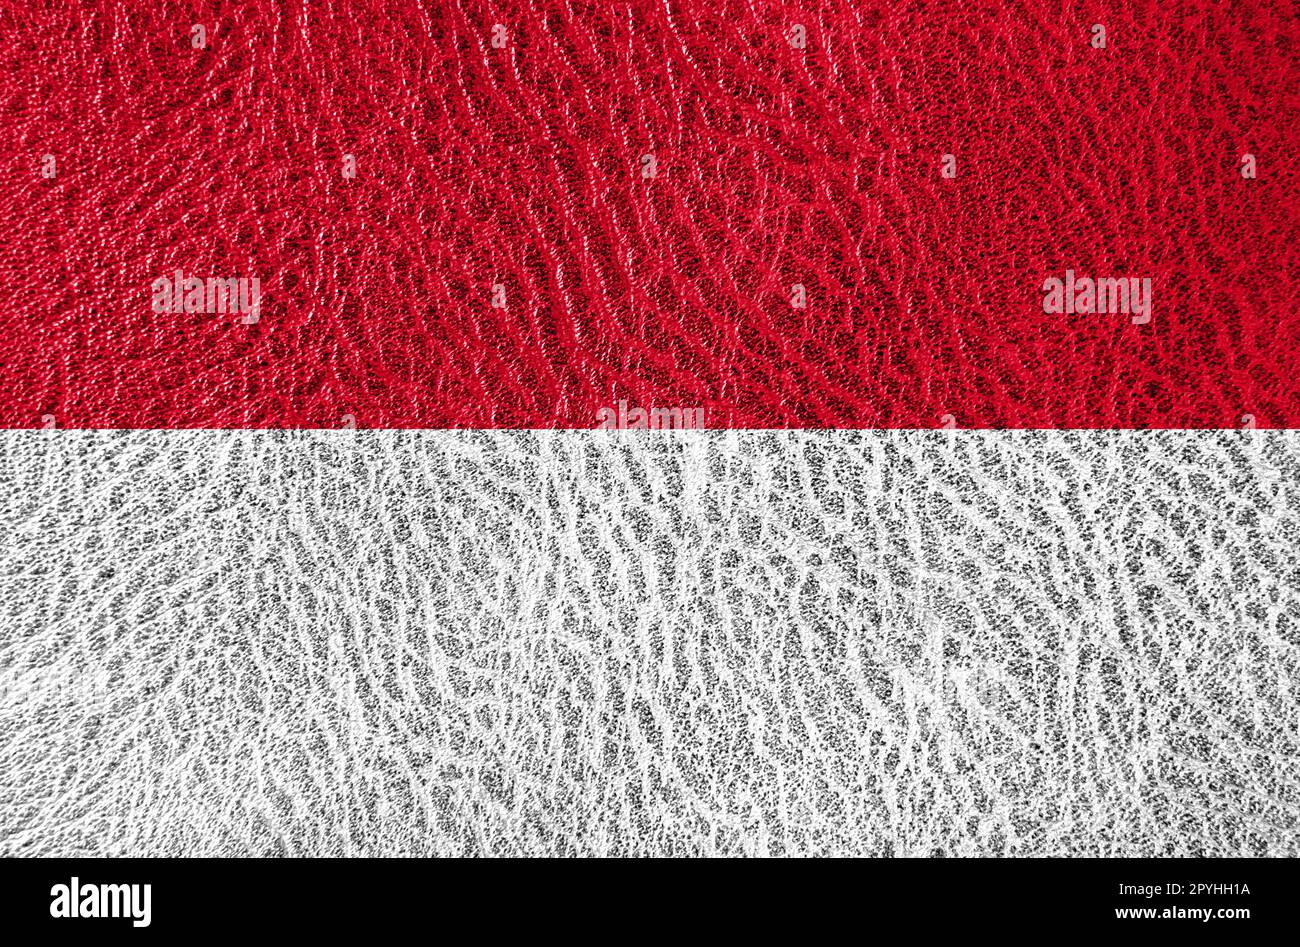 abstract leather texture with the flag Stock Photo